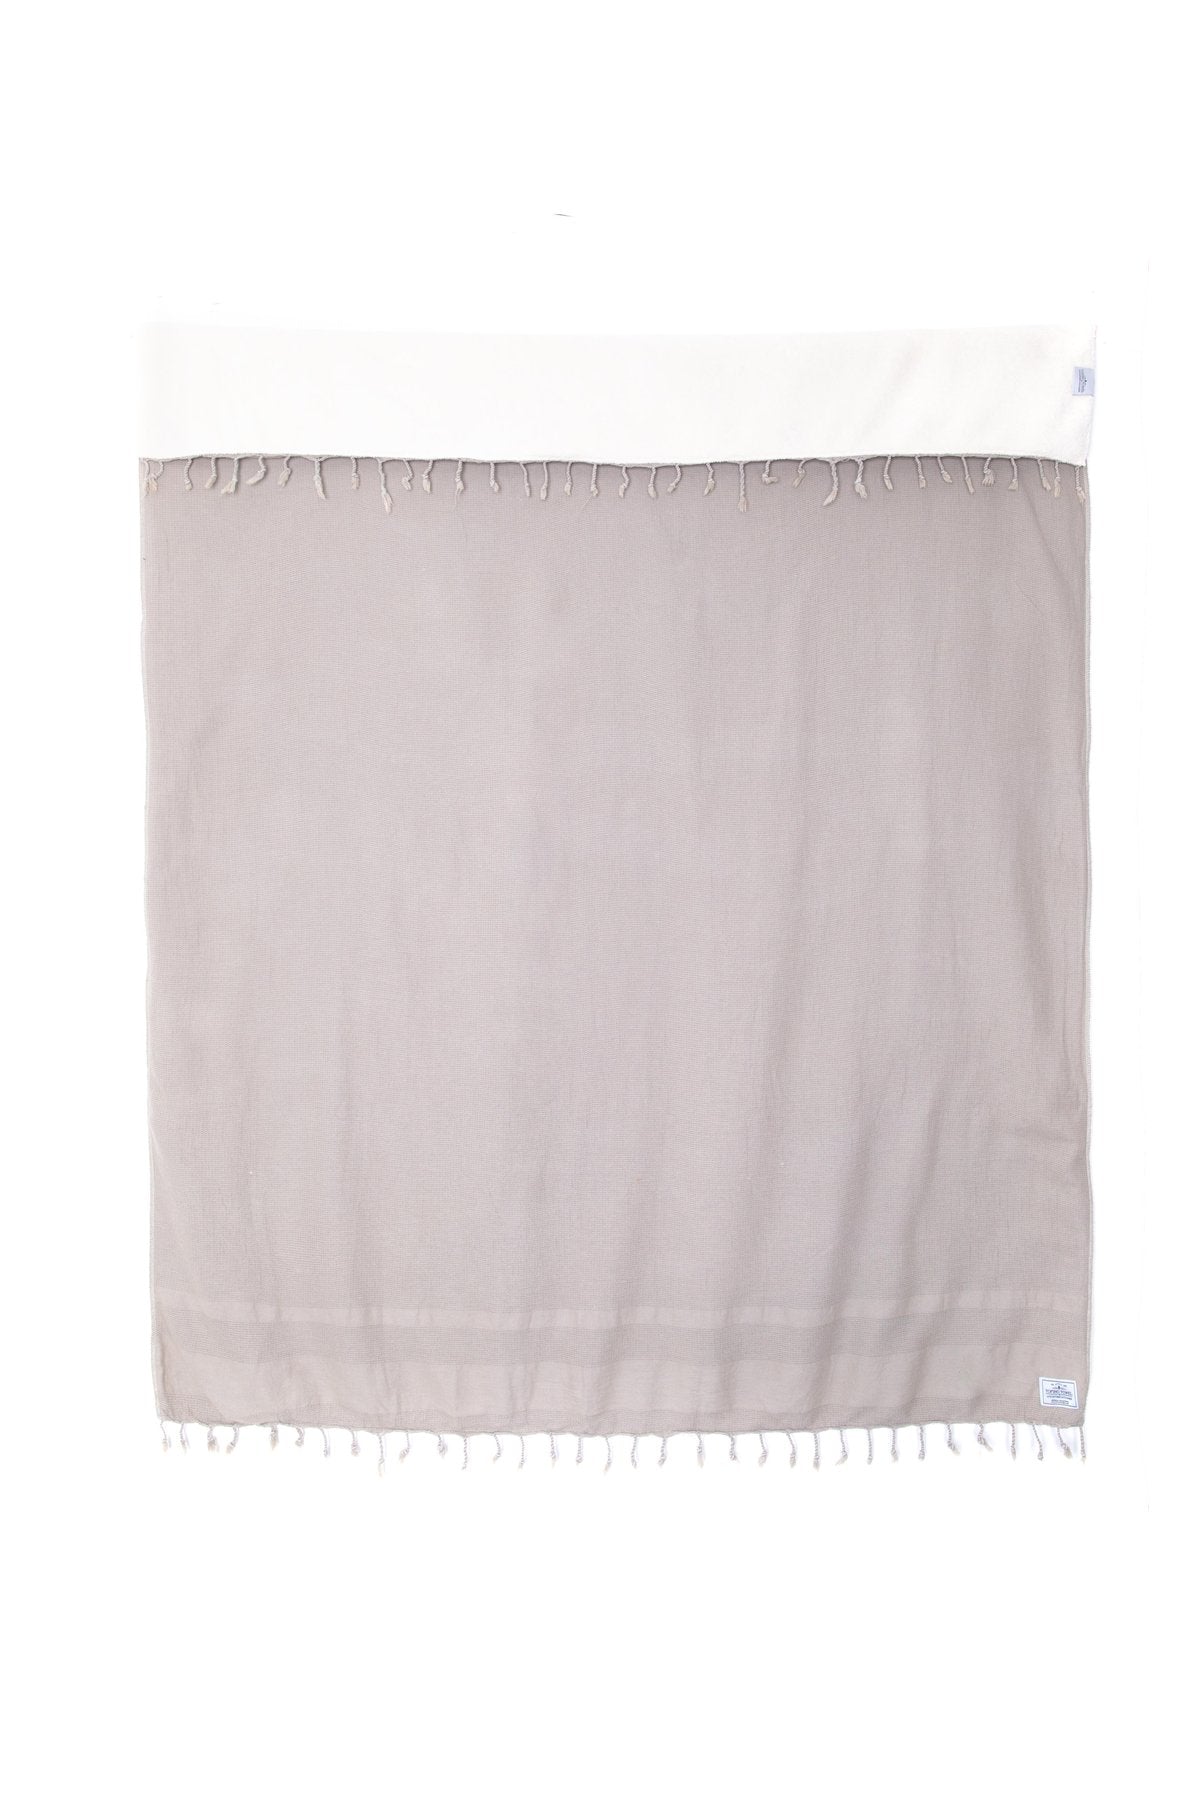 TOFINO TOWEL THE SHORE WASHED WAFFLE THROW DESERT